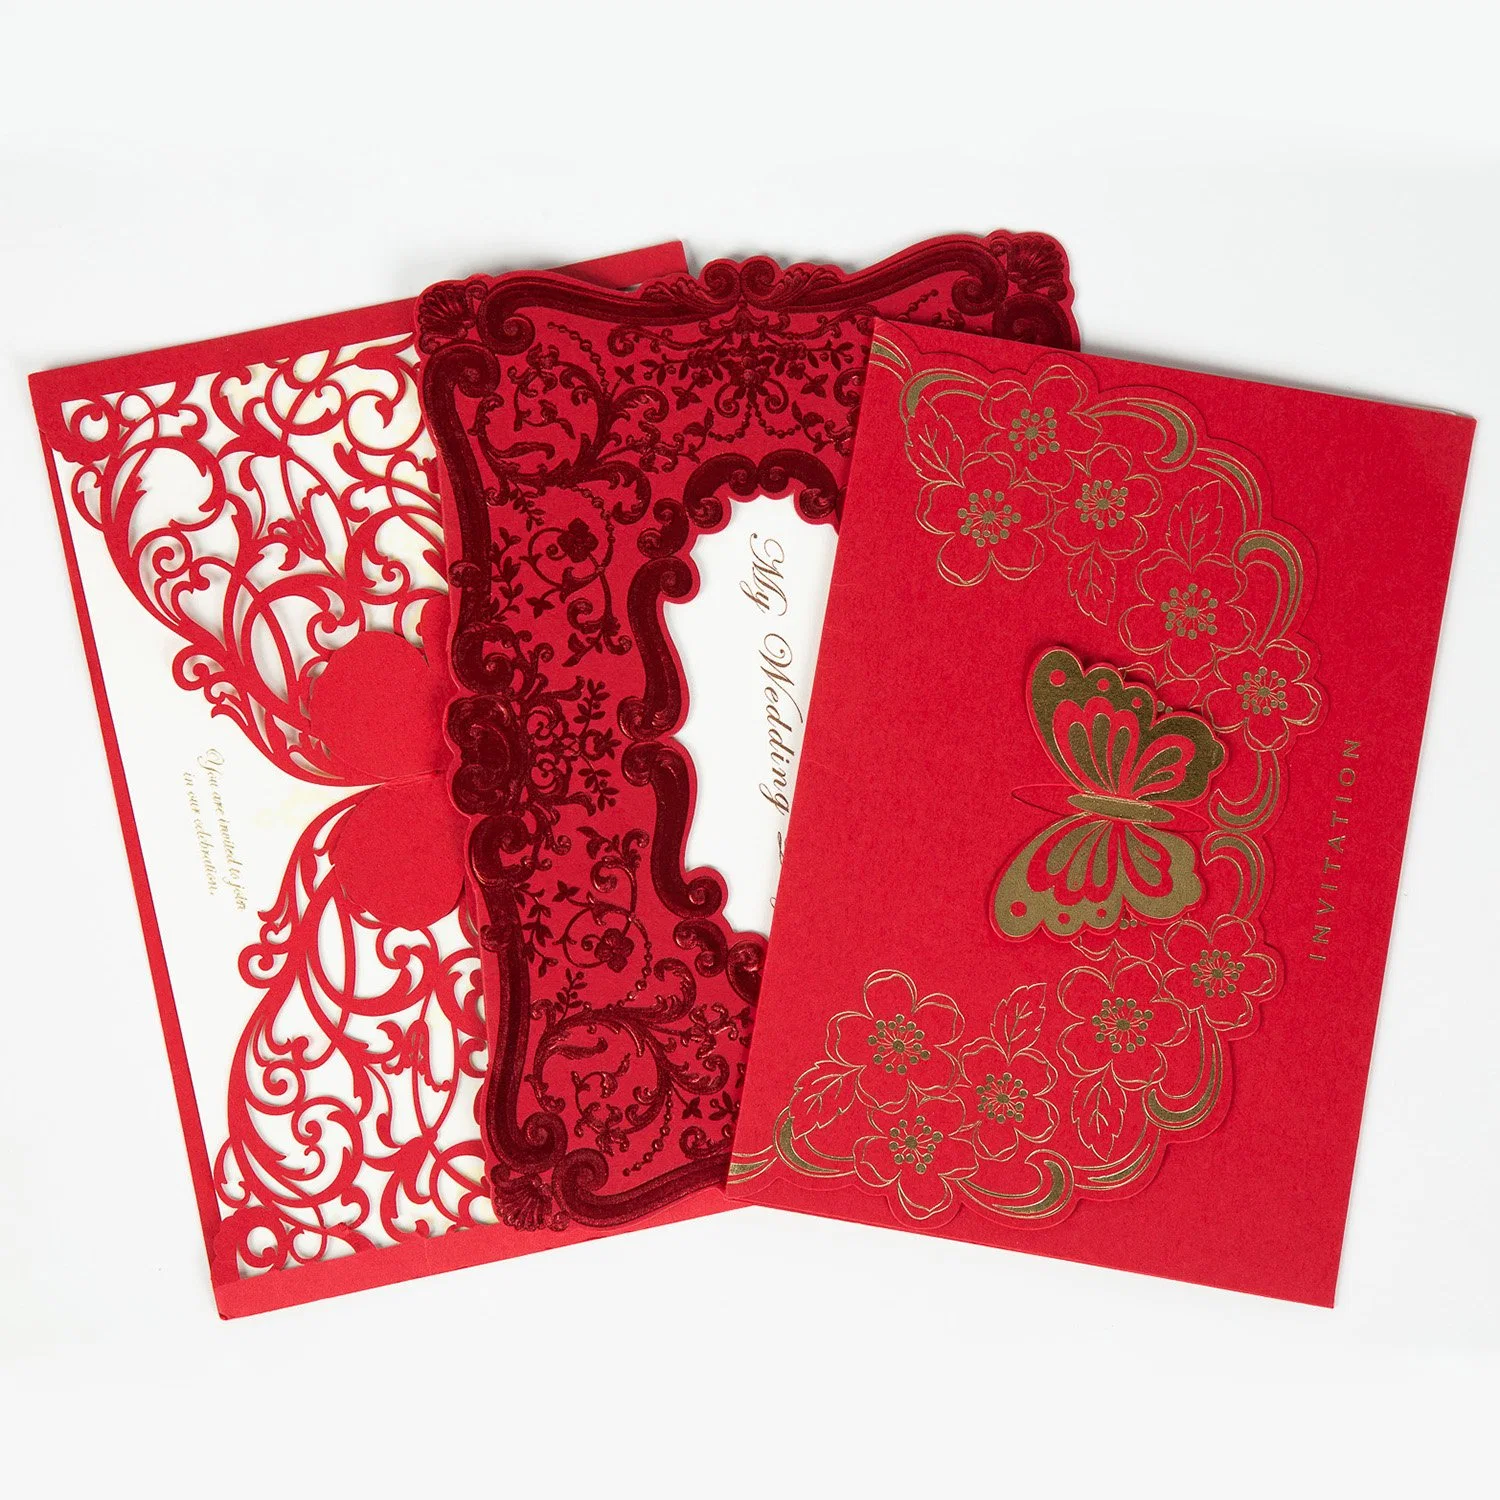 China Wholesale/Supplier New Design Hollow Carve Message Card Creative Gift Greeting Cards Postcards Wedding Invitations New Year Birthday Party Invitation Card